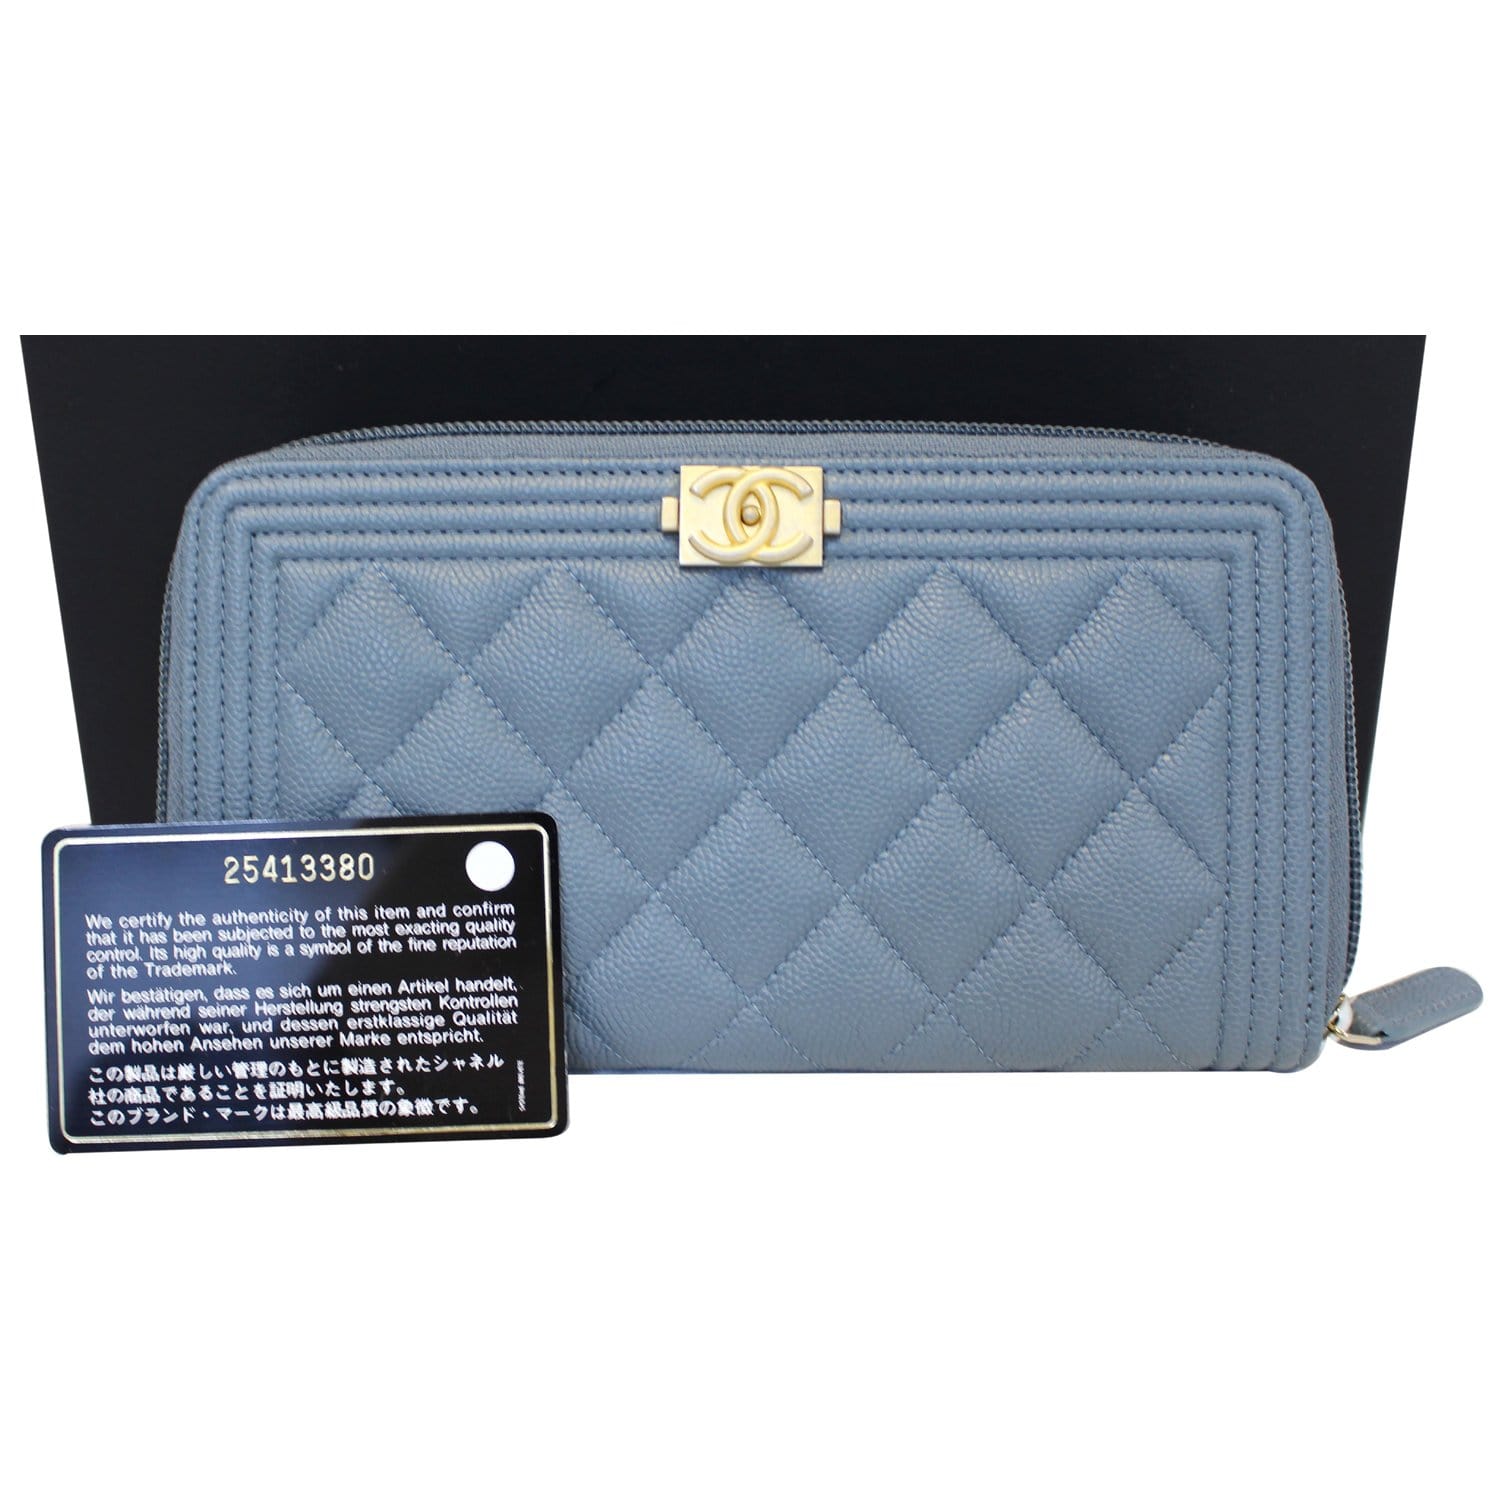 Chanel Small Zip Wallet AP0226 B10583 NO195, Blue, One Size